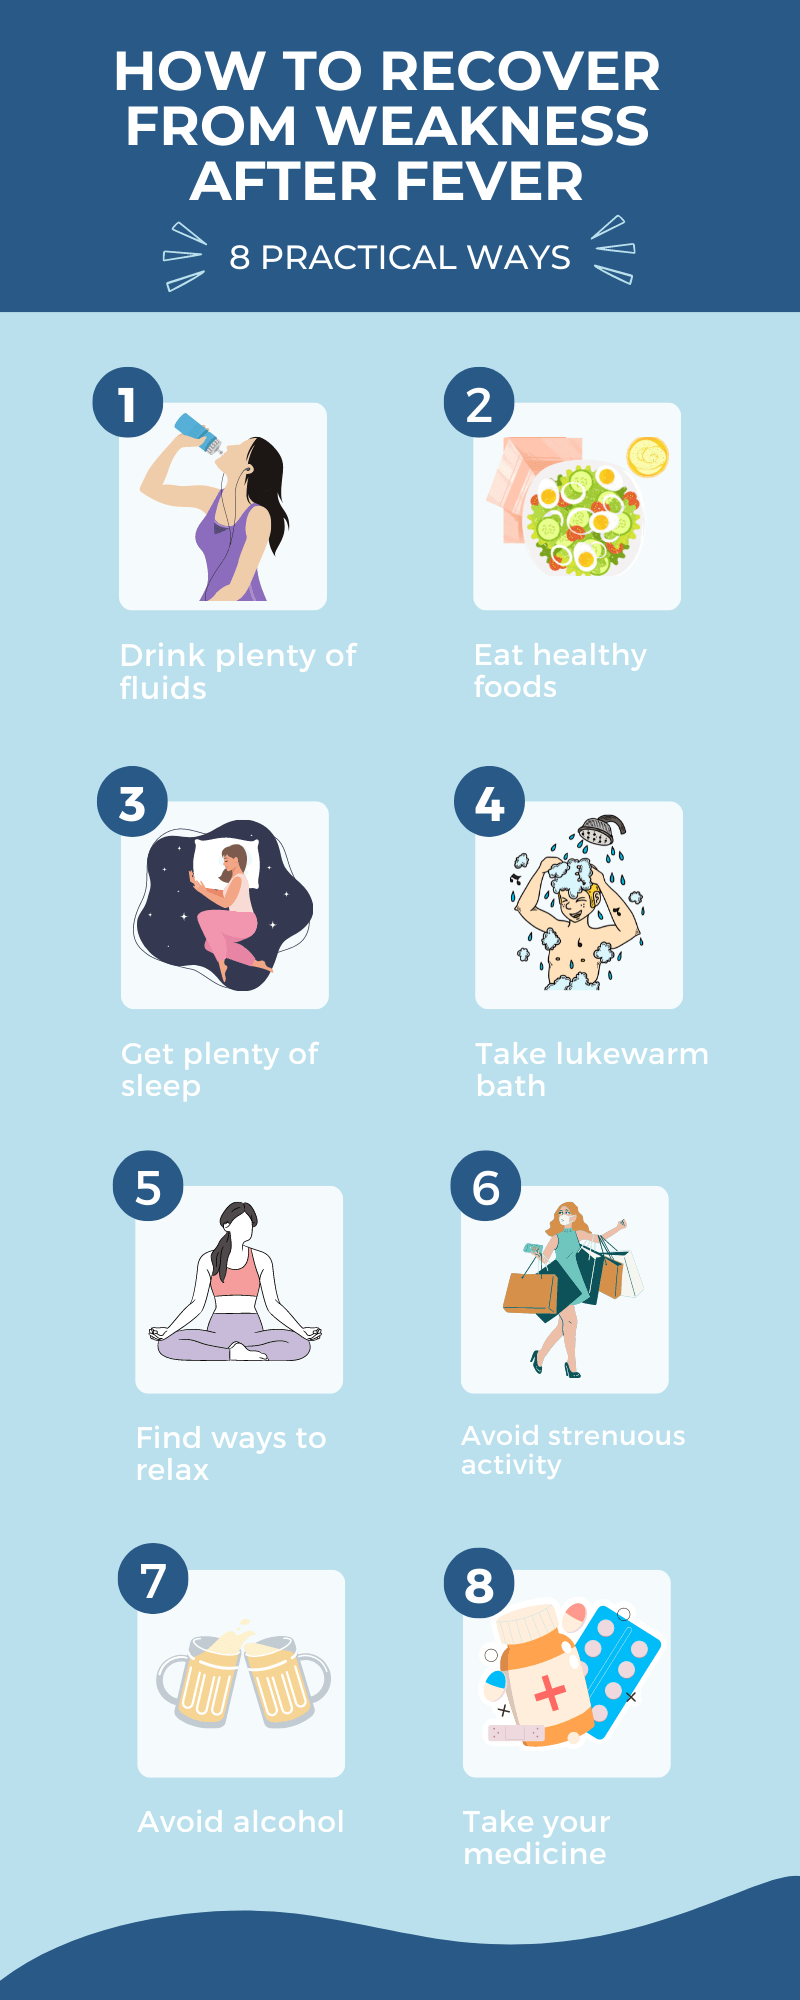 How to recover from weakness after fever infographic